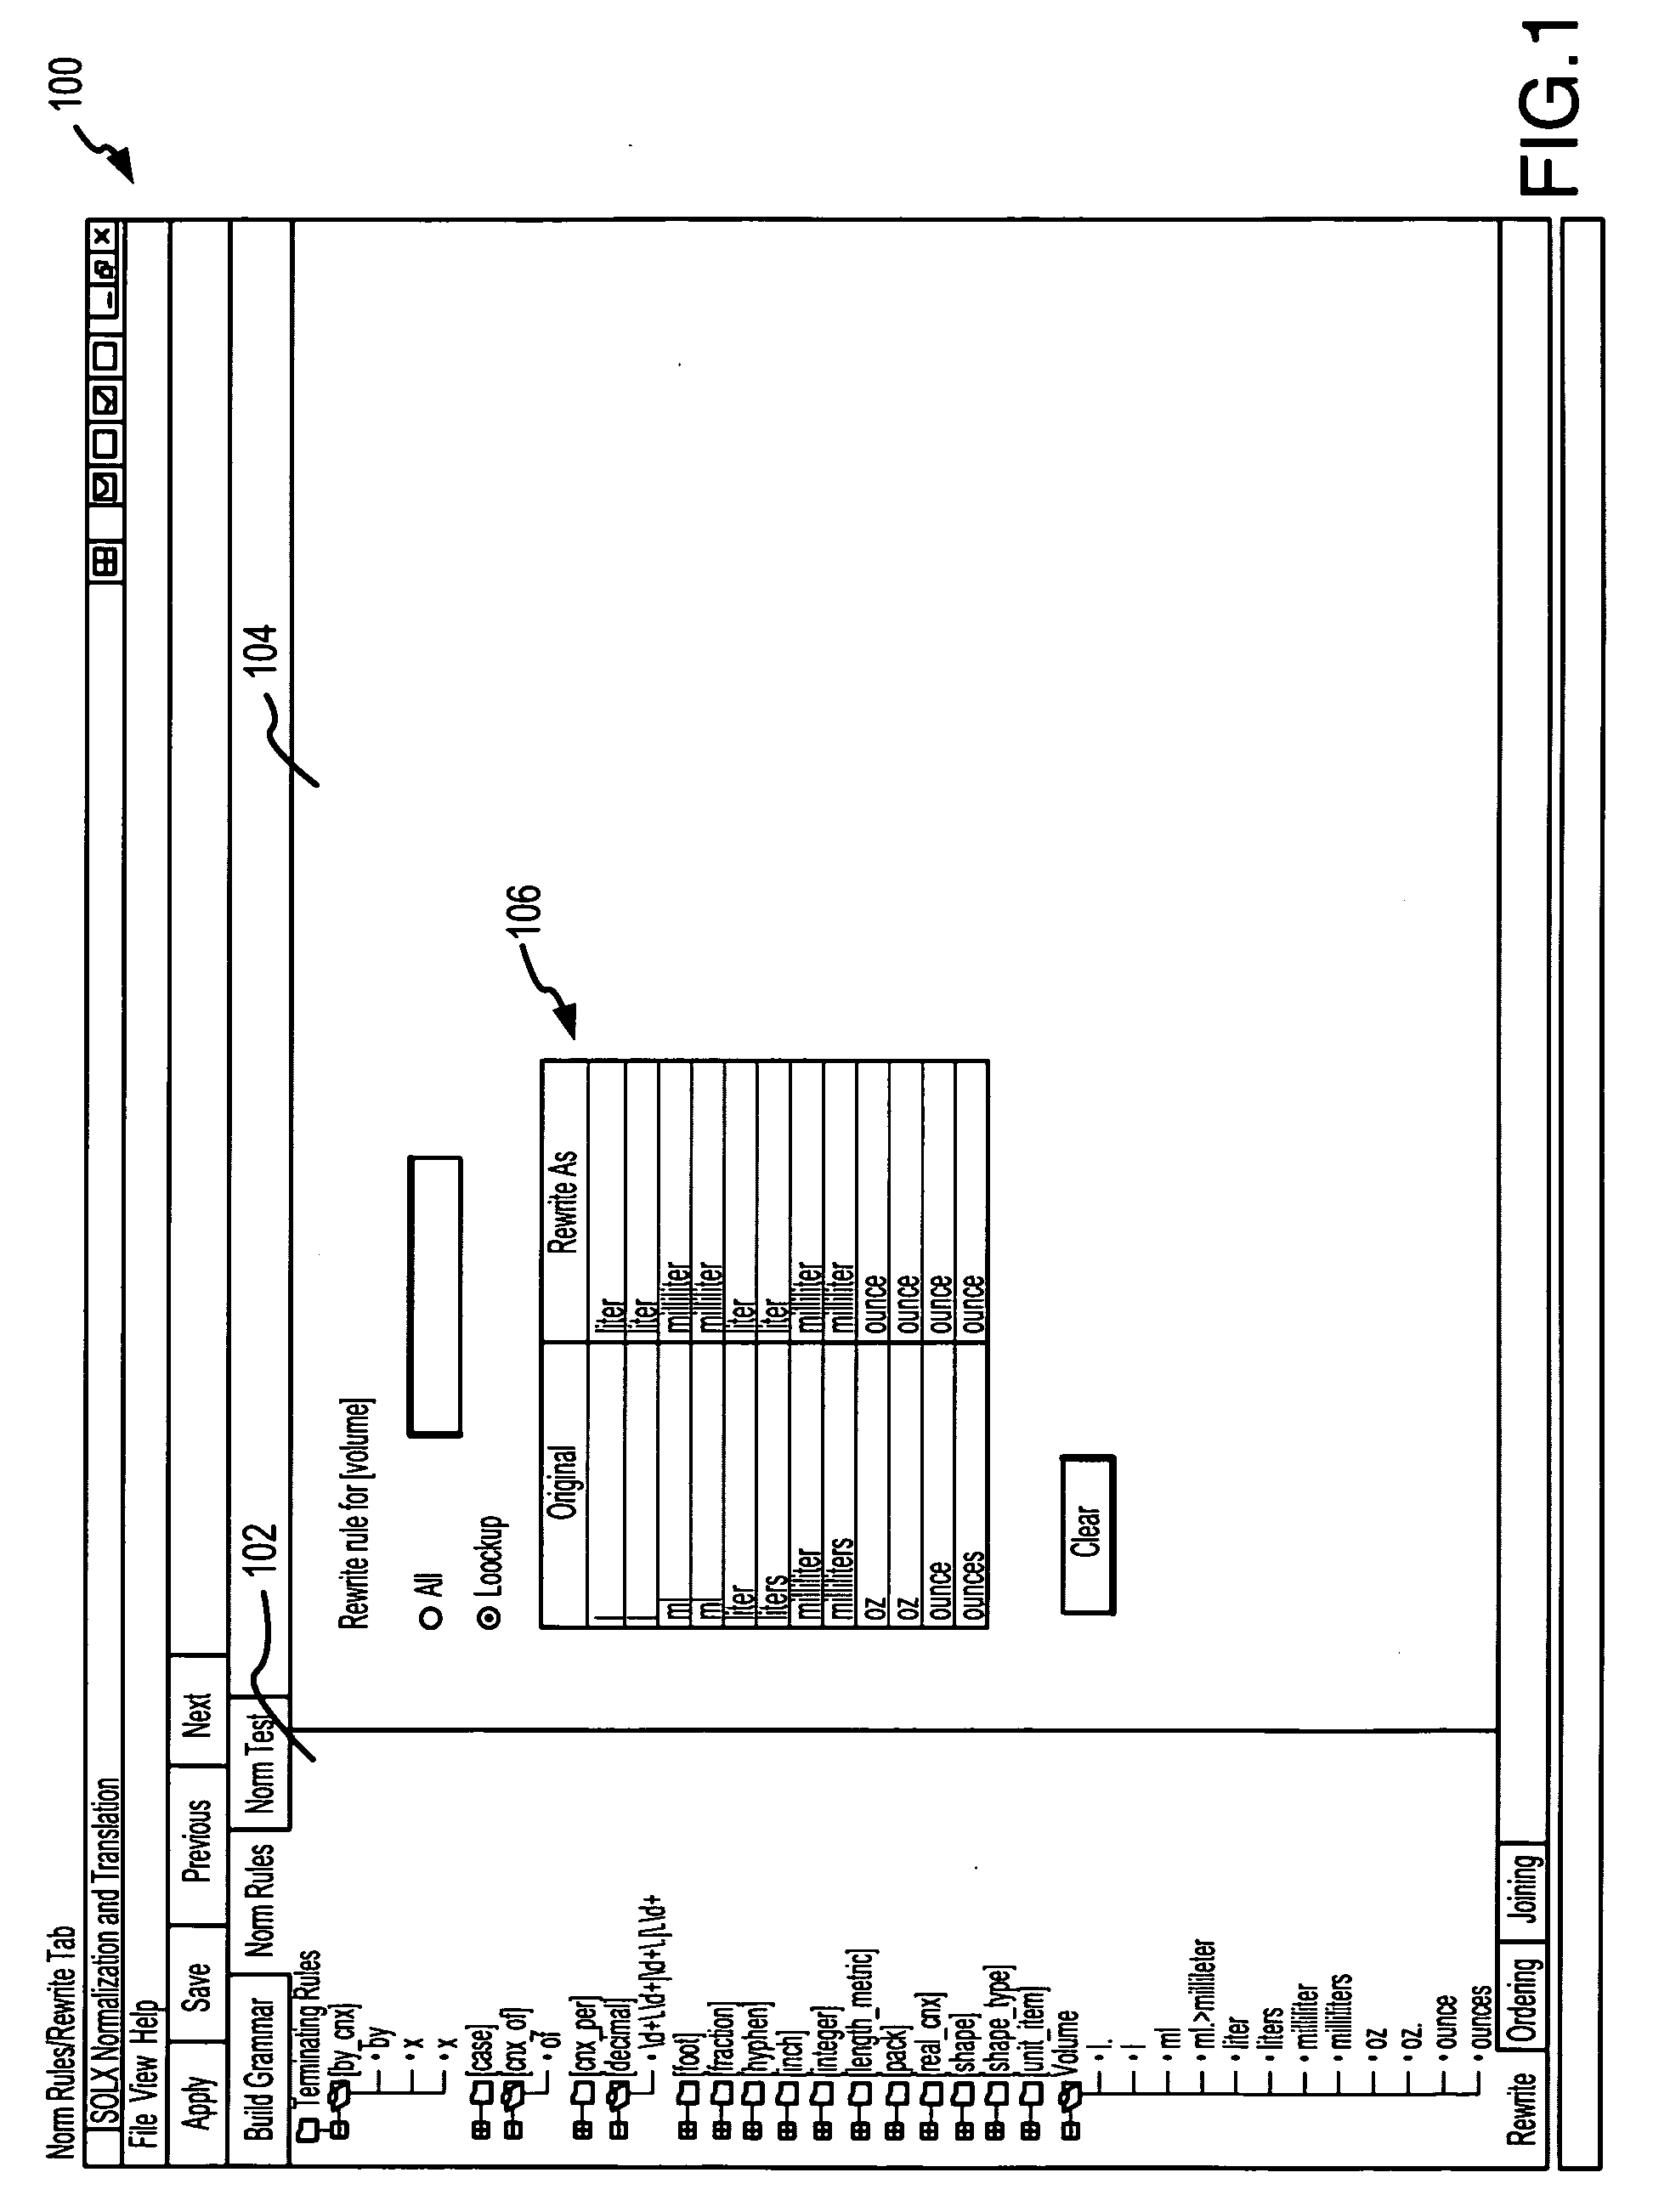 Method and apparatus for normalizing and converting structured content